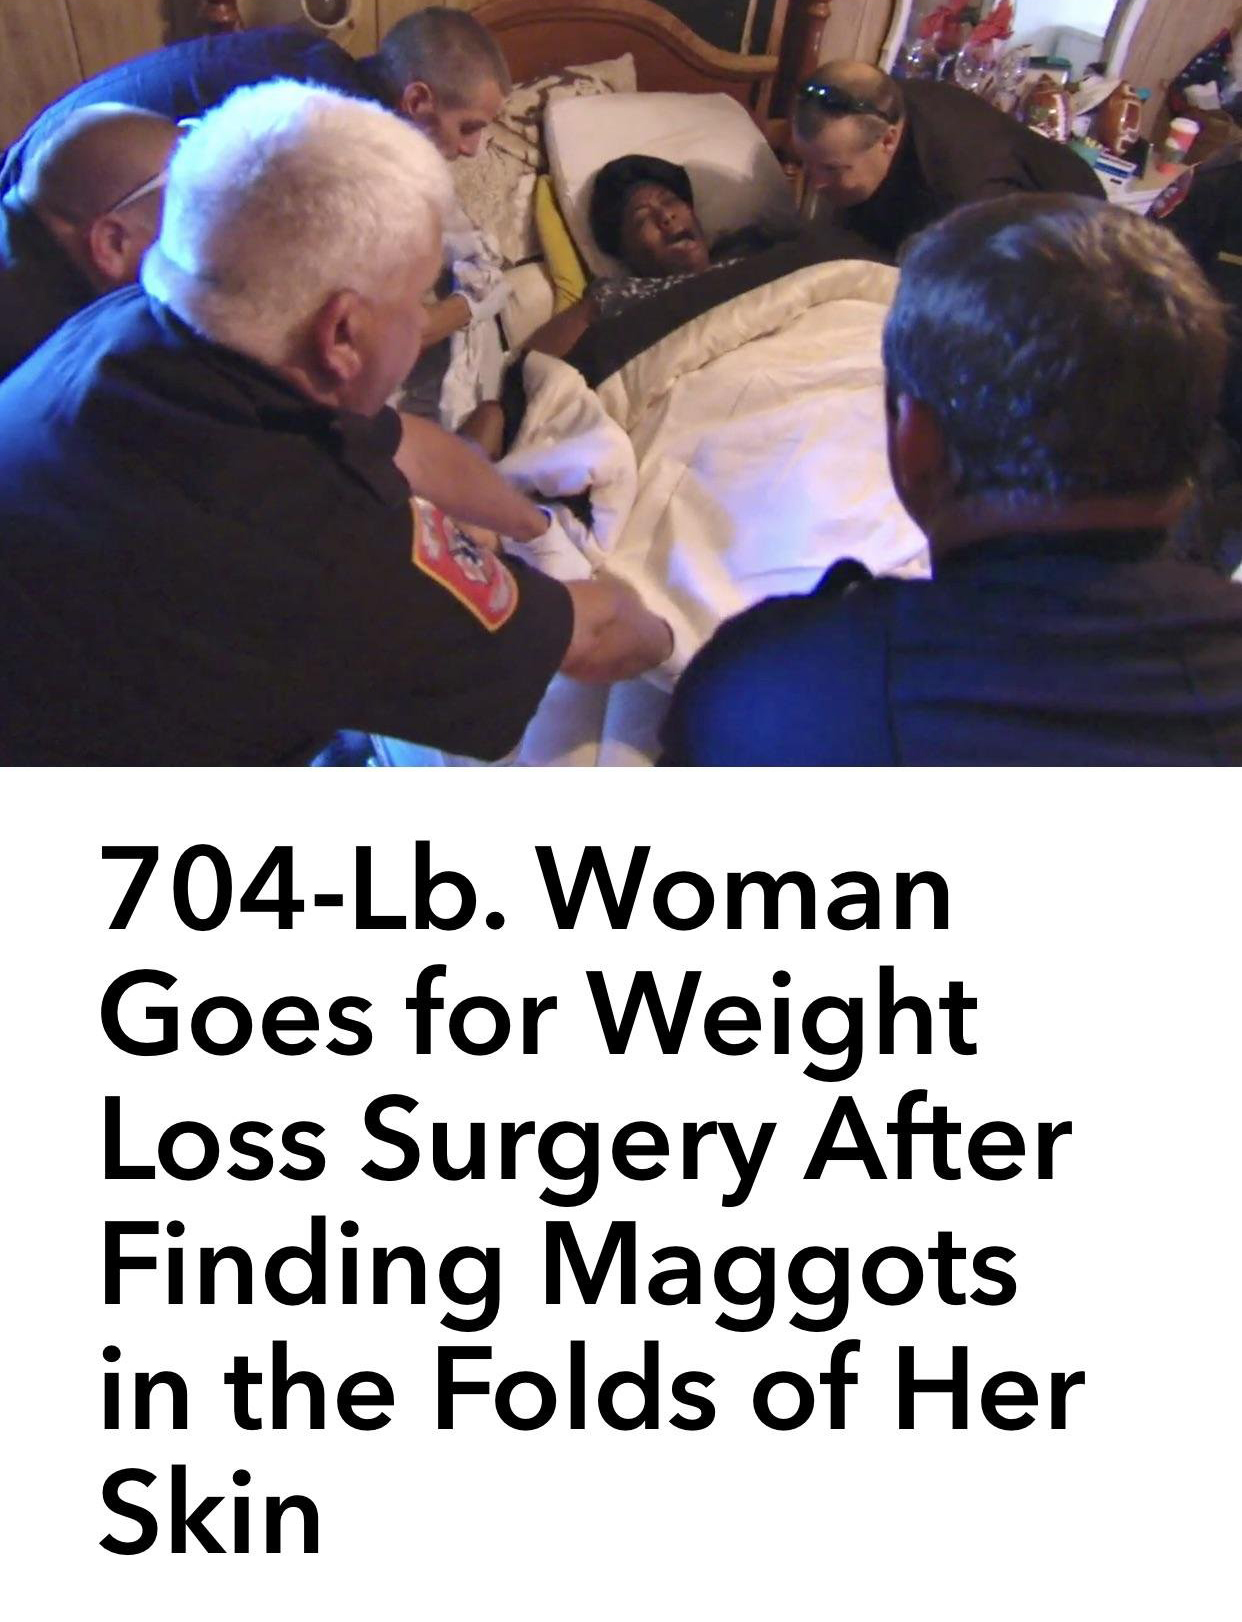 lisa fleming my 600 lb life - 704Lb. Woman Goes for Weight Loss Surgery After Finding Maggots in the Folds of Her Skin